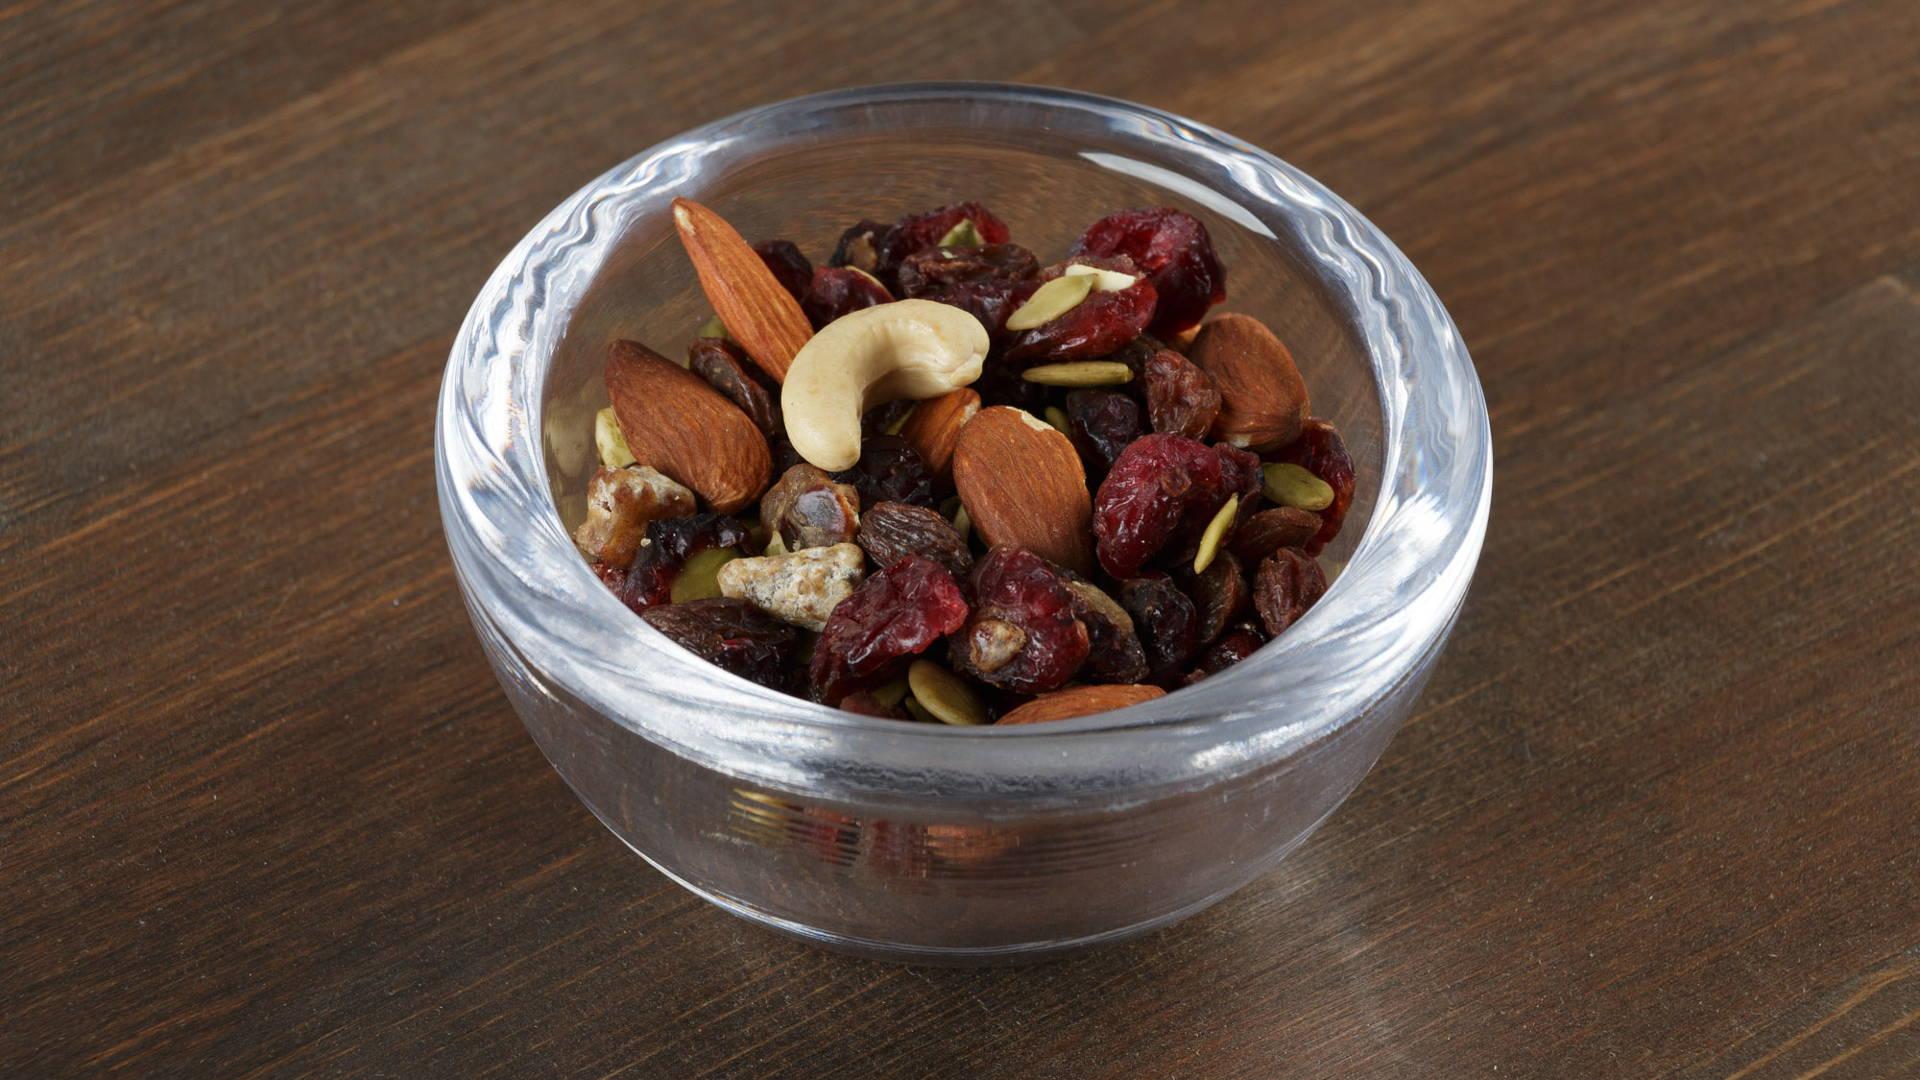 Bowl Of Nuts